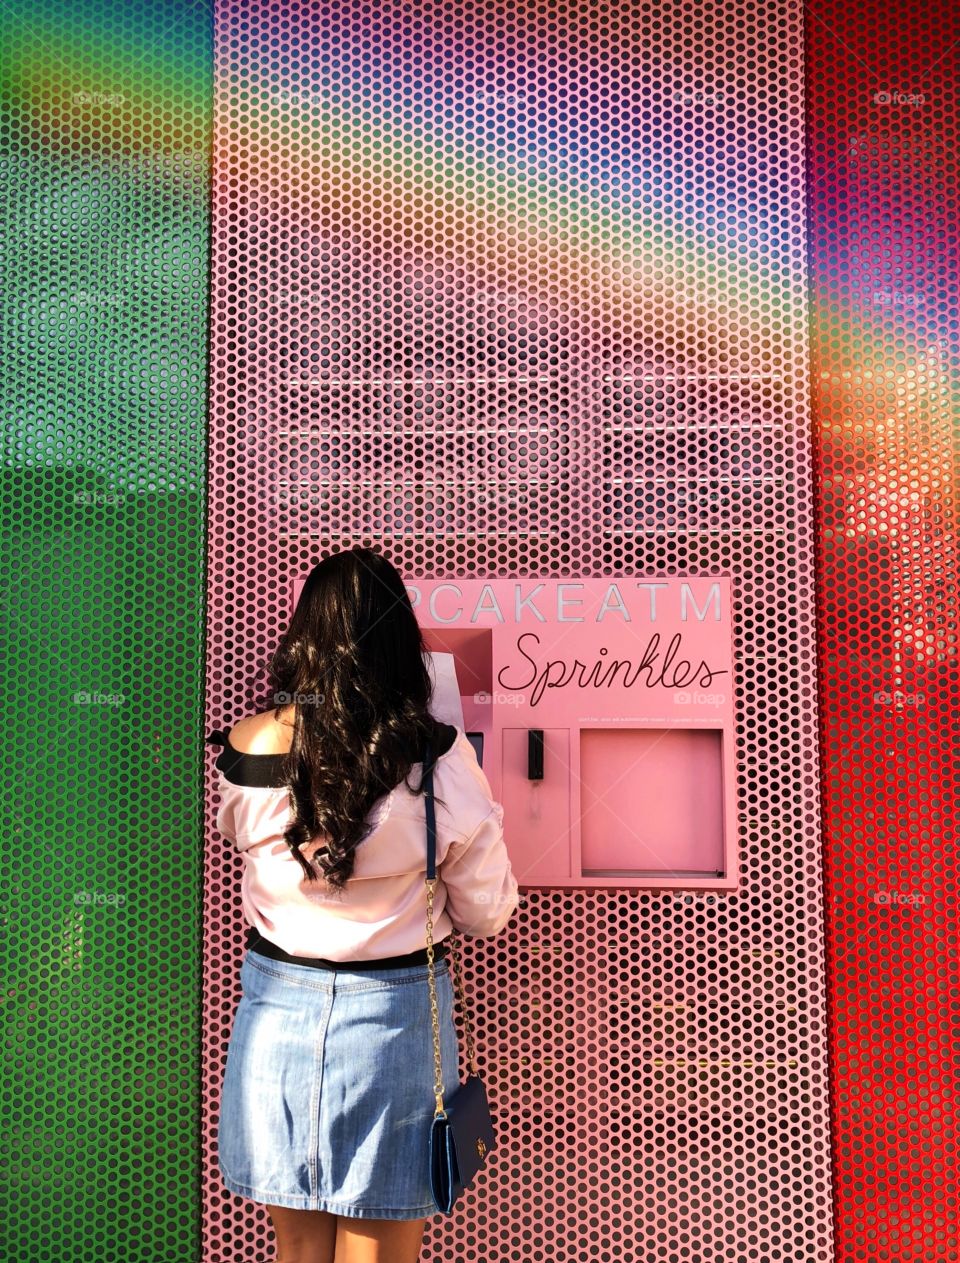 Girl withdrawing cupcakes from the Sprinkles cupcake atm